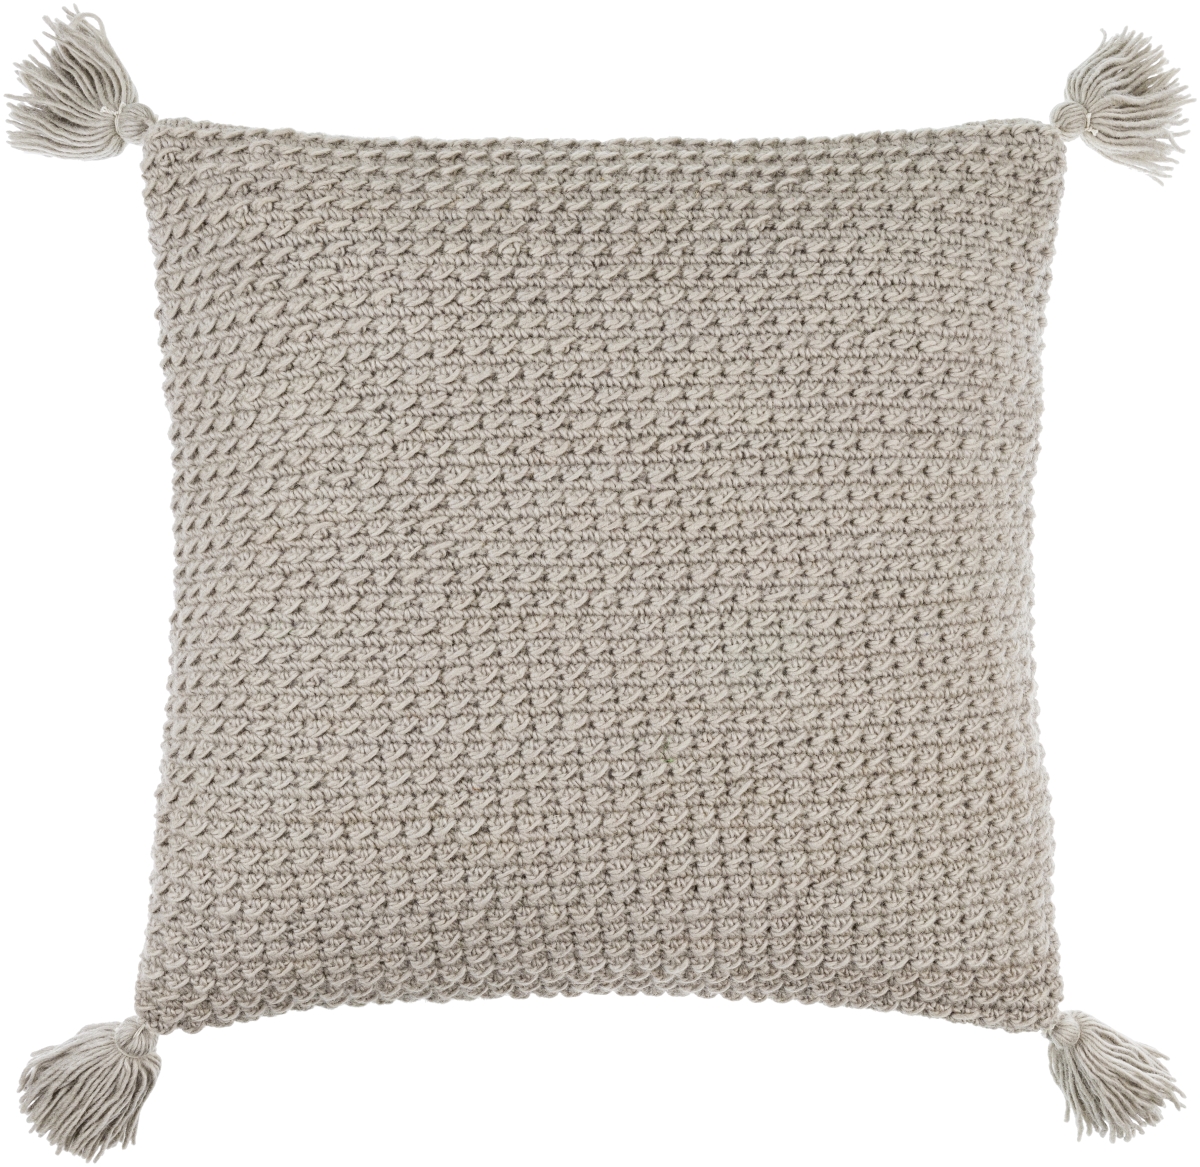 Picture of Livabliss MKO002-2020 20 x 20 in. Makrome Square Pillow Cover